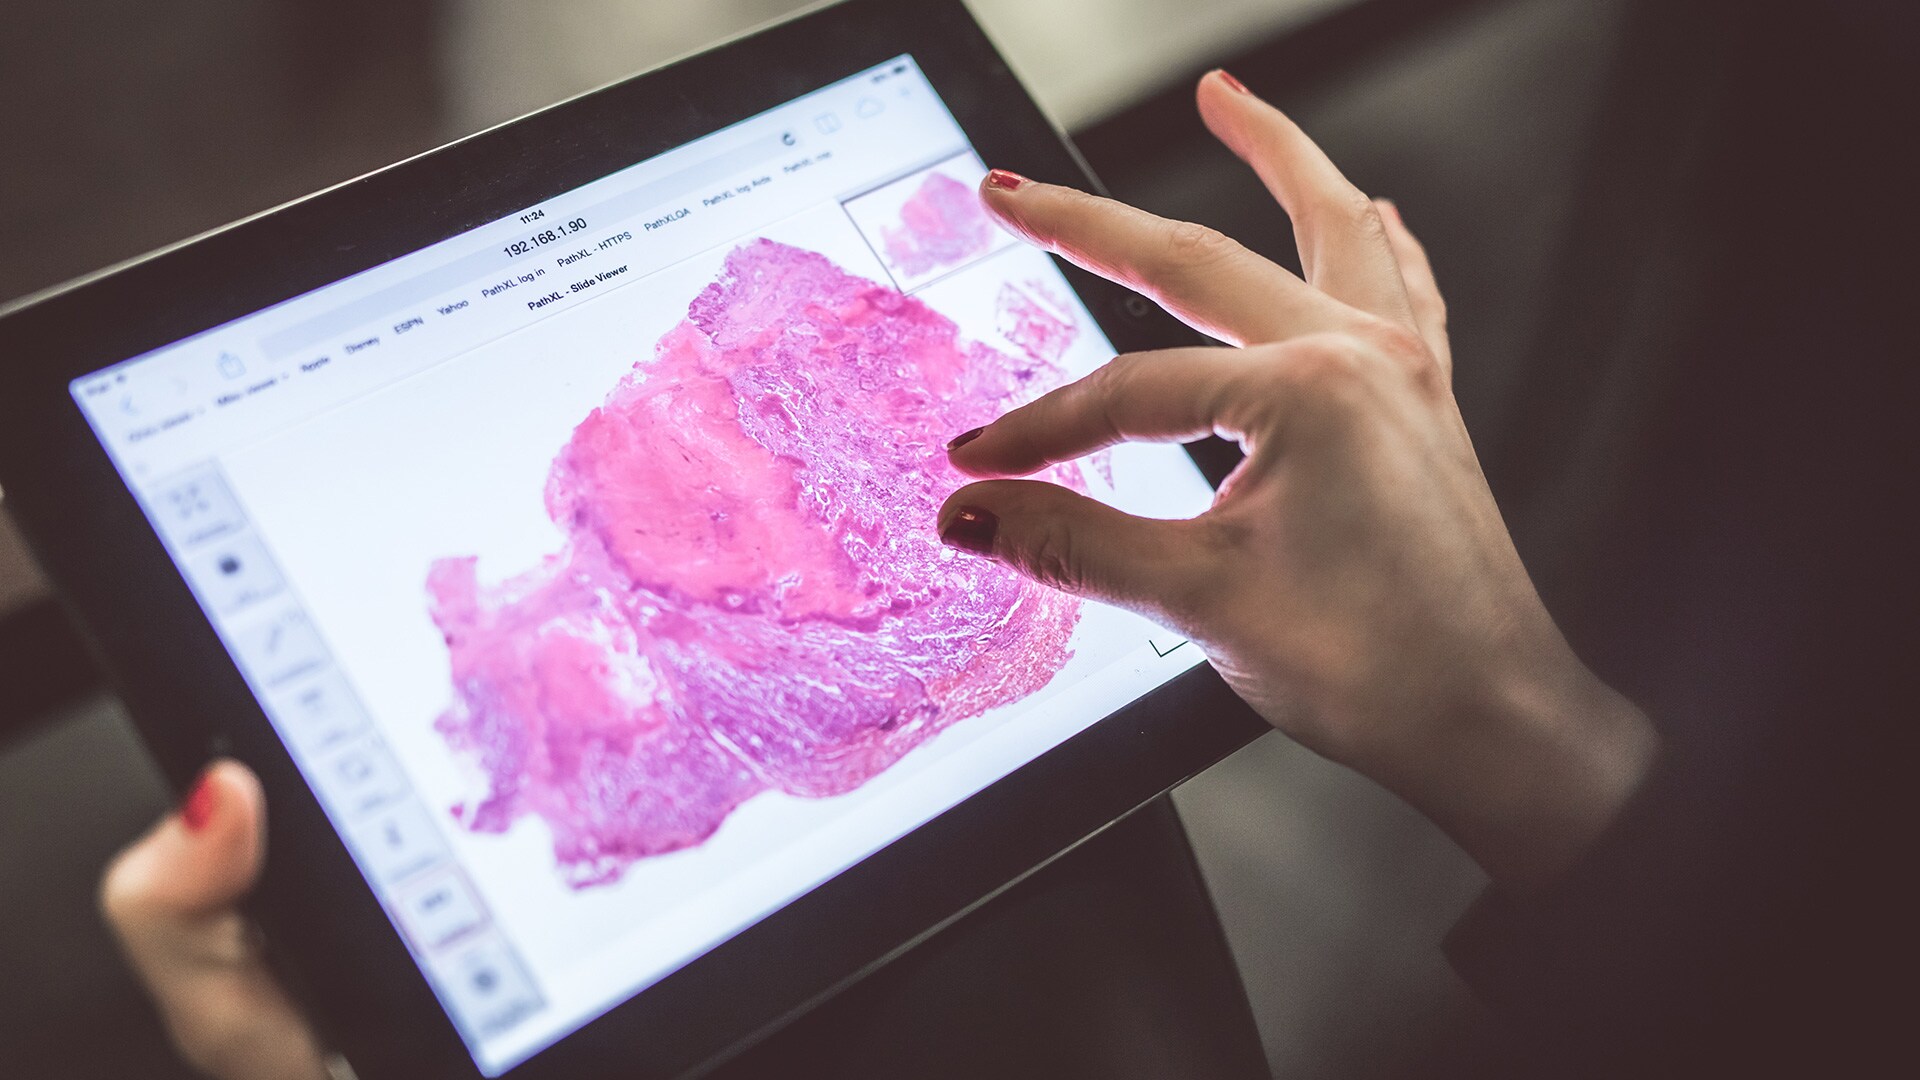 North West Anglia NHS Foundation Trust implements fully digital histopathology solution, resulting in improved clinical outcomes in complex cases